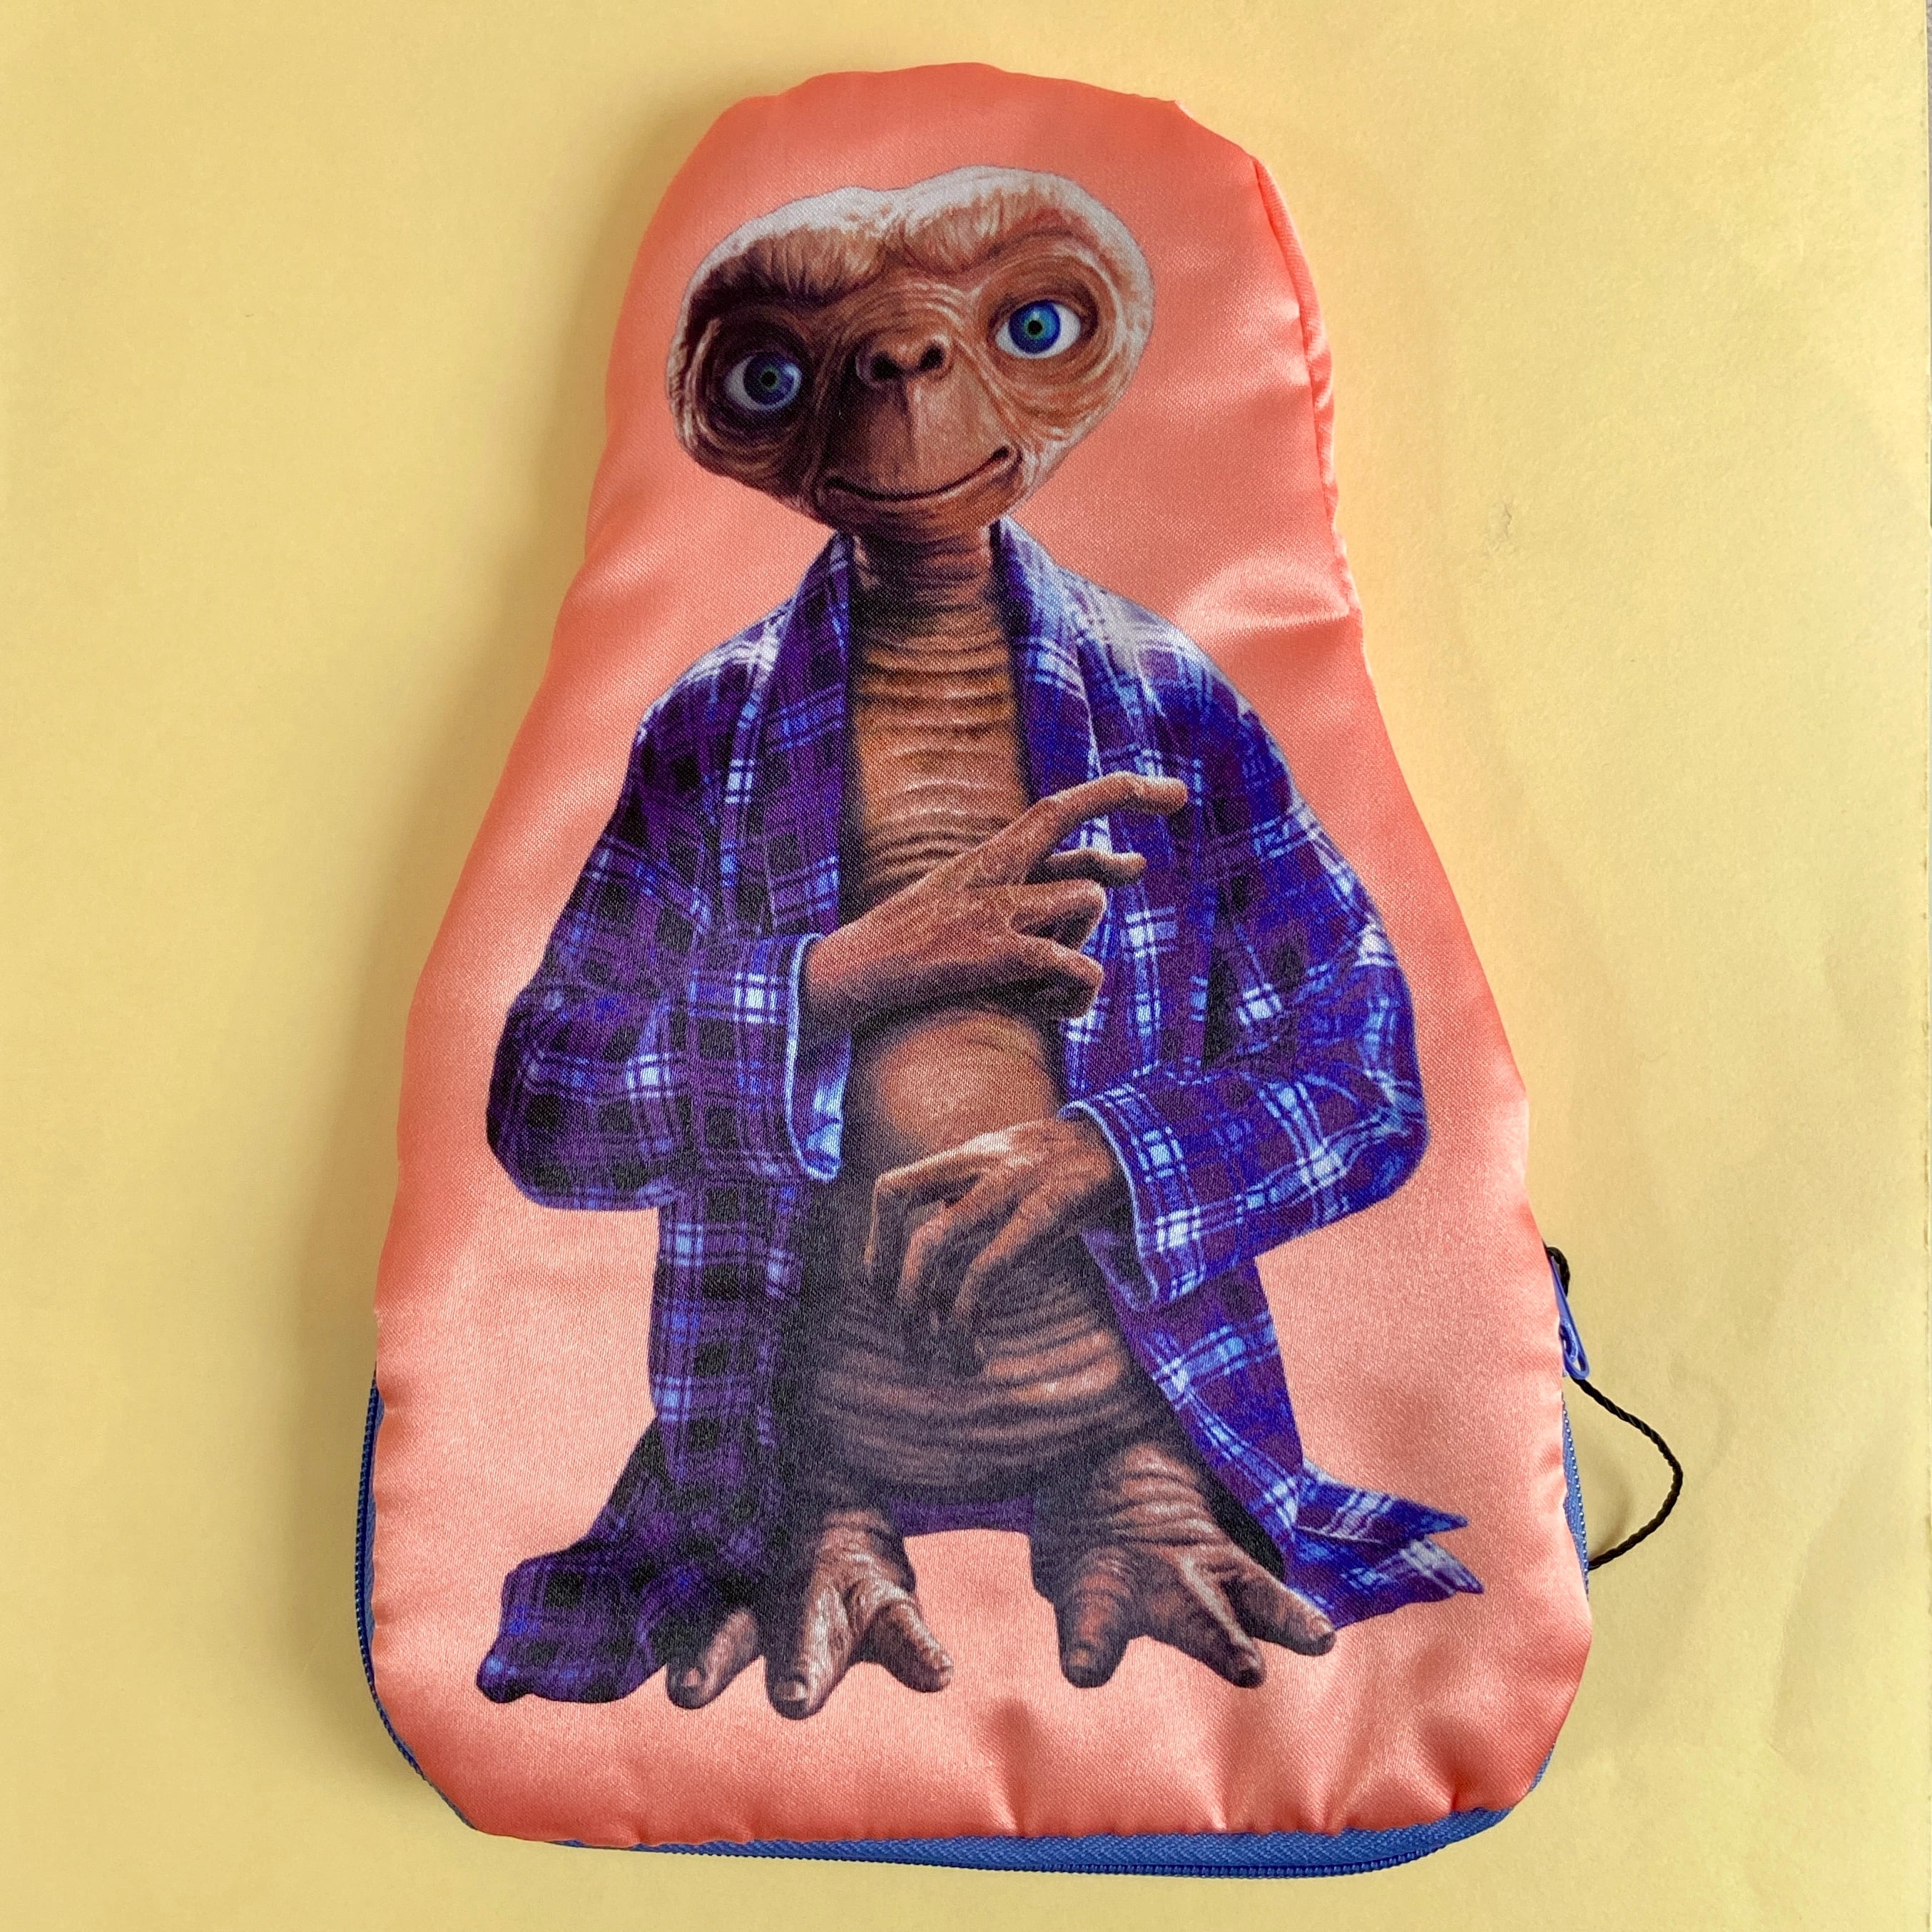 E.T. サテンポーチ ピンク E.T. satin pouch | 雑貨店feve